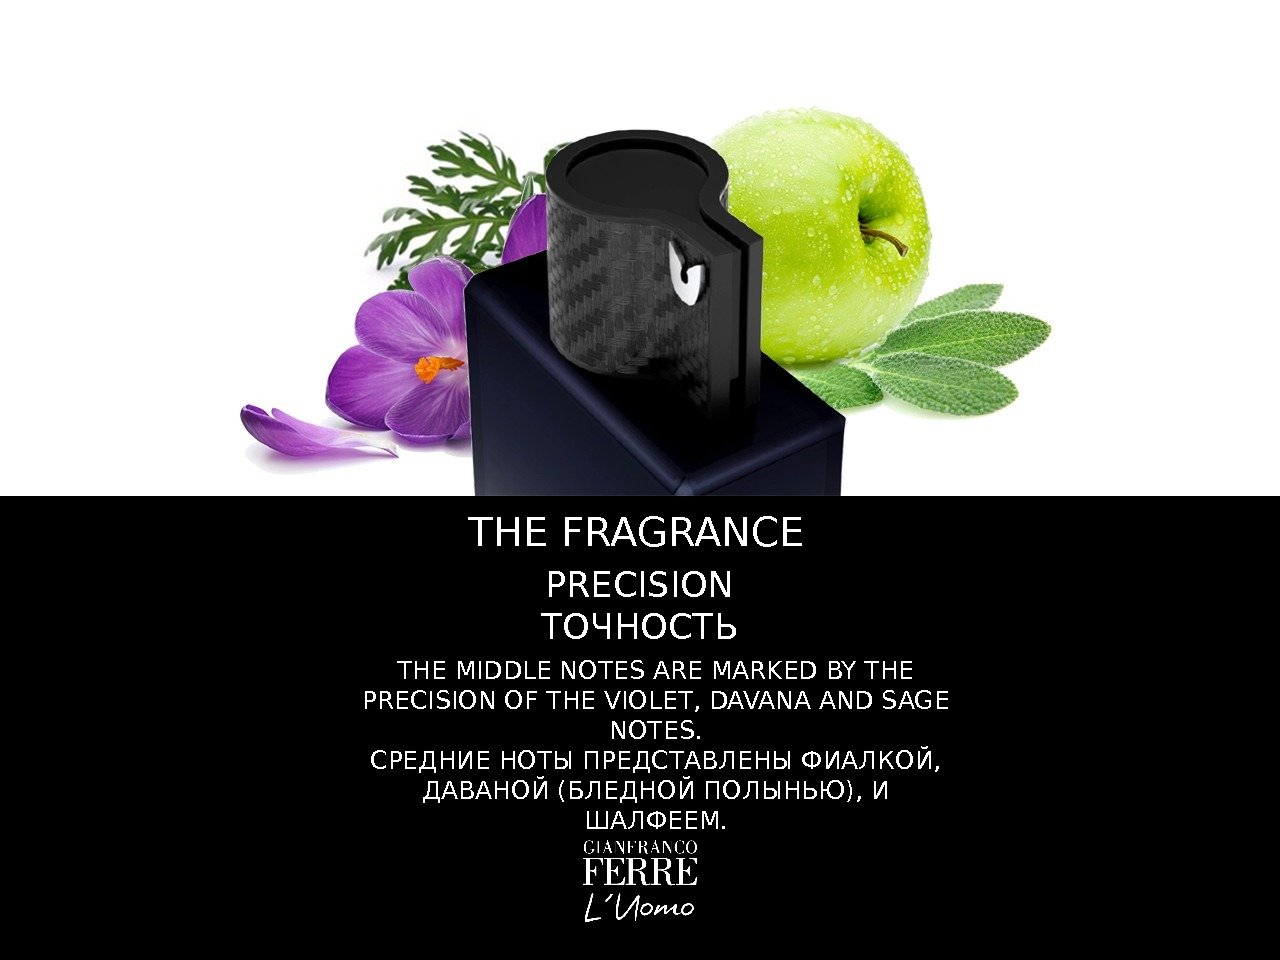 THE FRAGRANCE PRECISION ТОЧНОСТЬ THE MIDDLE NOTES ARE MARKED BY THE PRECISION OF THE